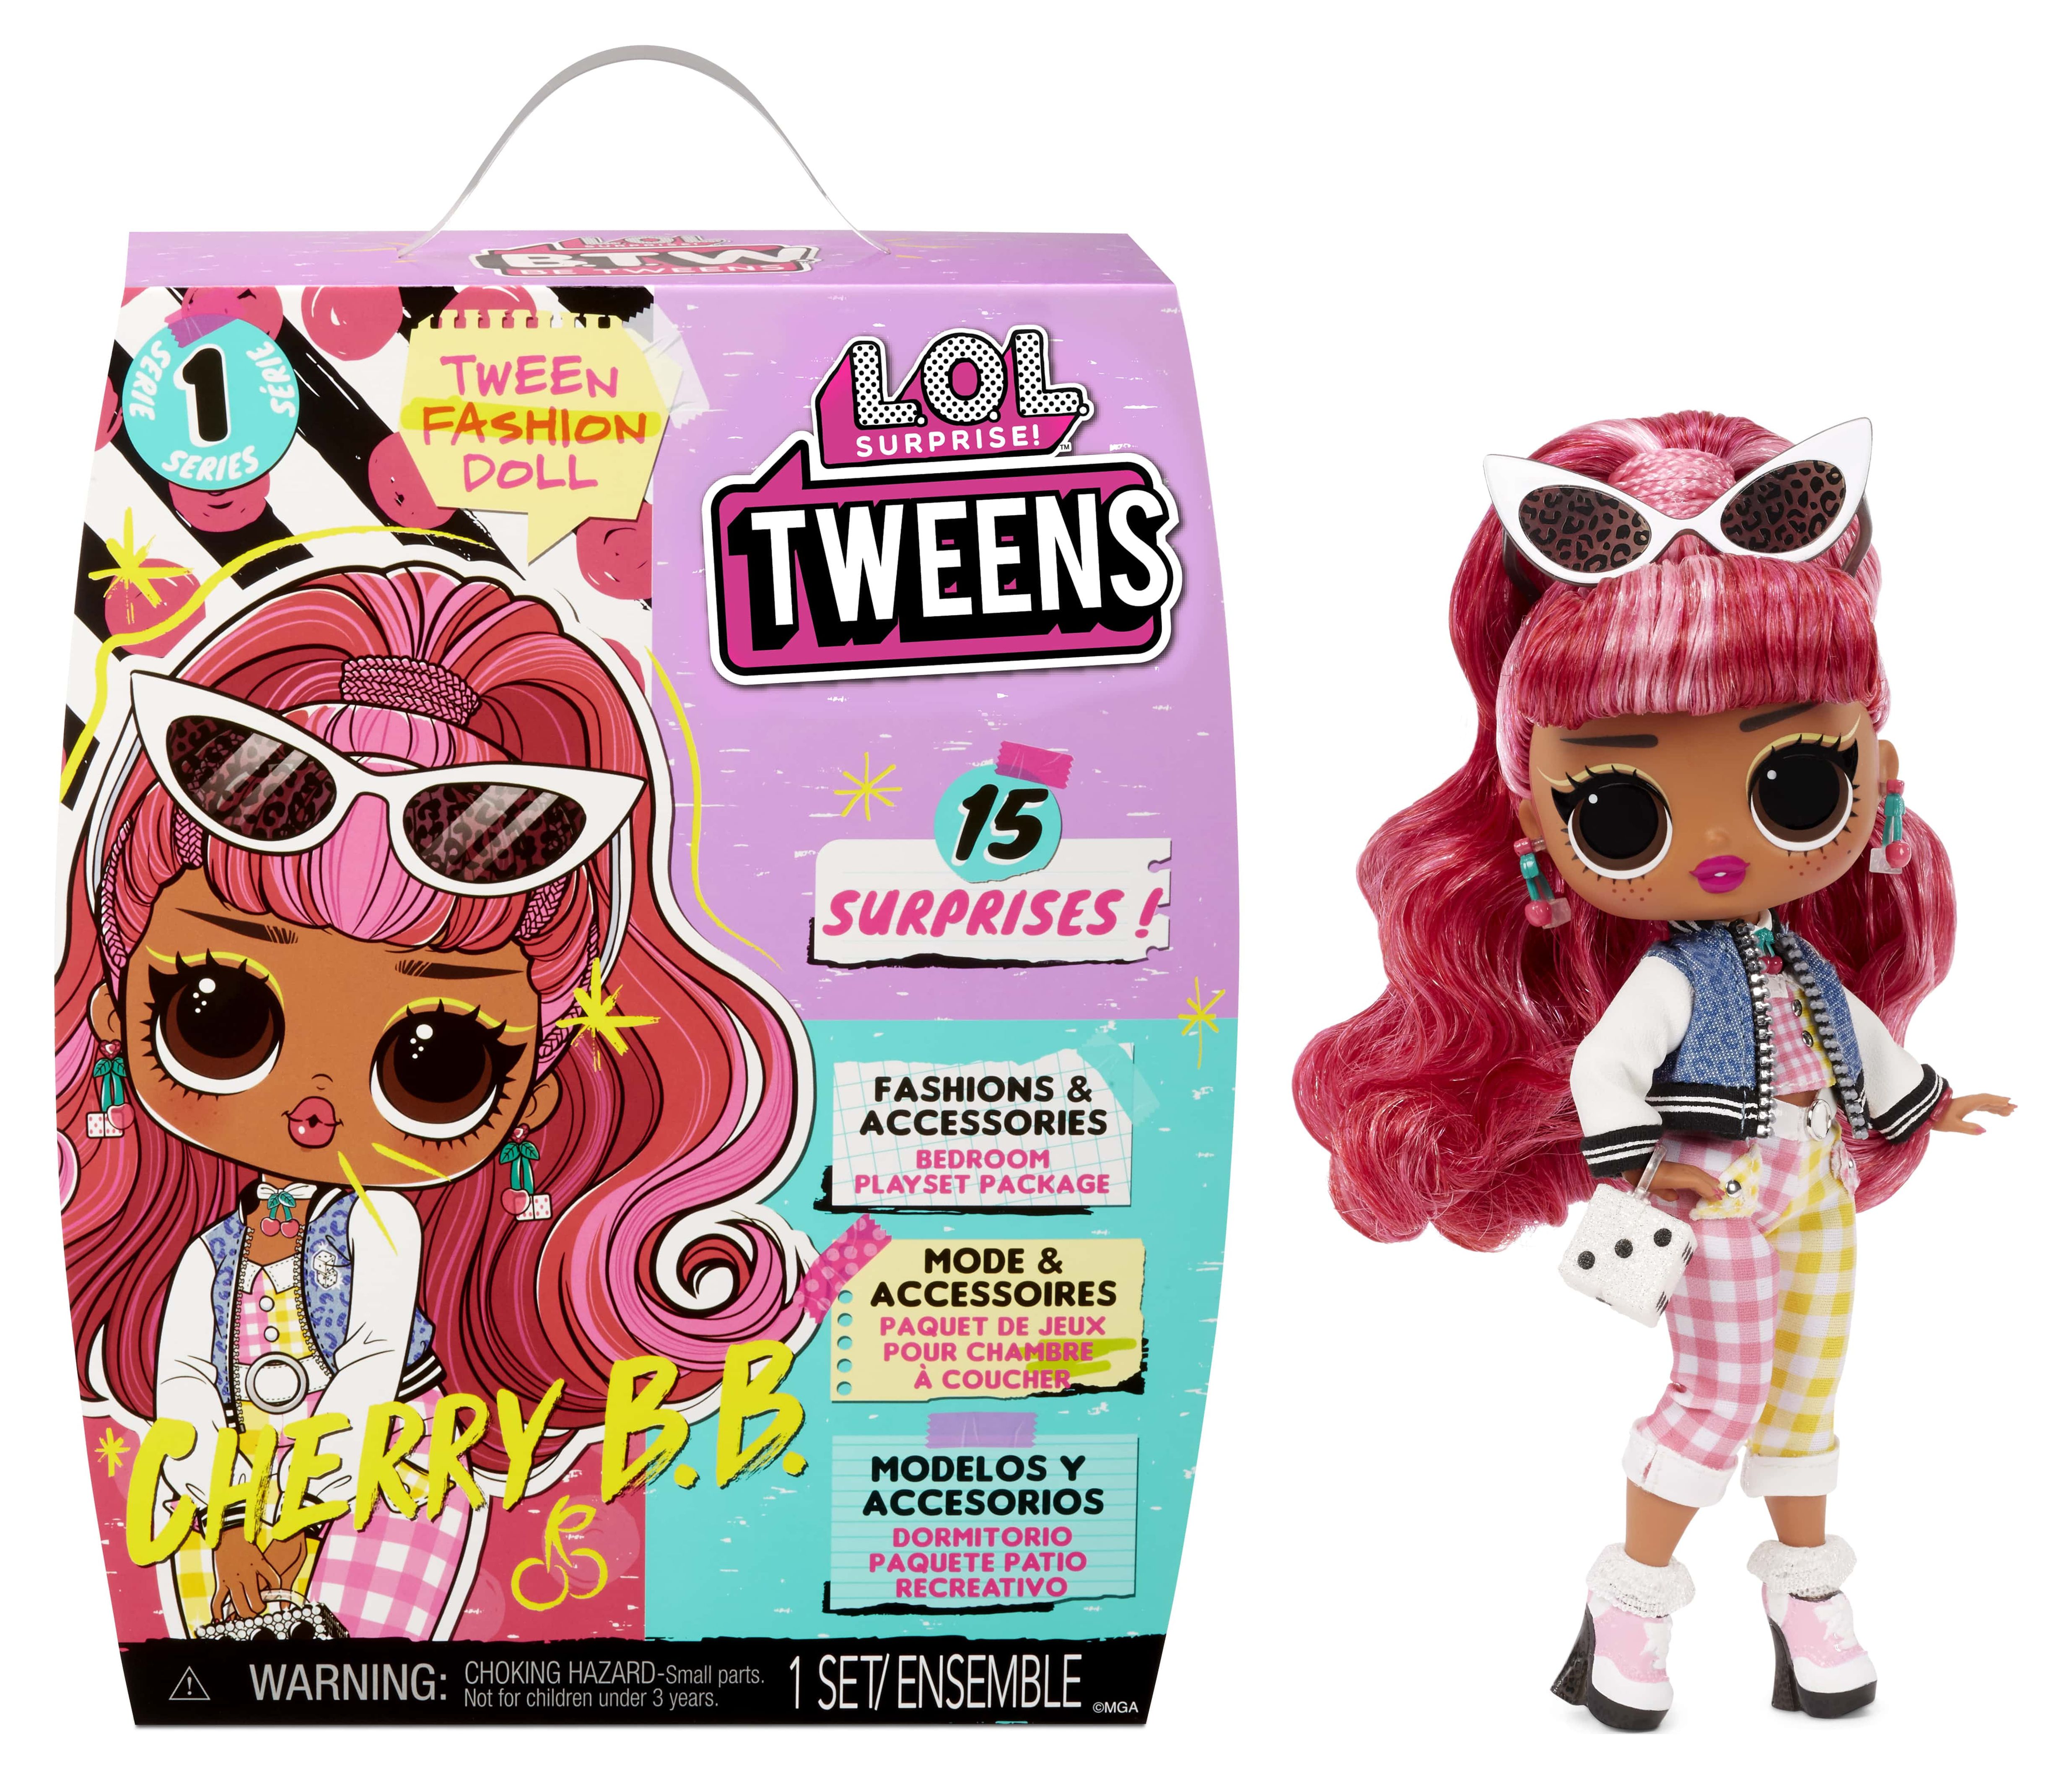 LOL Surprise Tweens Fashion Doll Cherry BB With 15 Surprises, Great Gift for Kids Ages 4 5 6+ - image 1 of 8